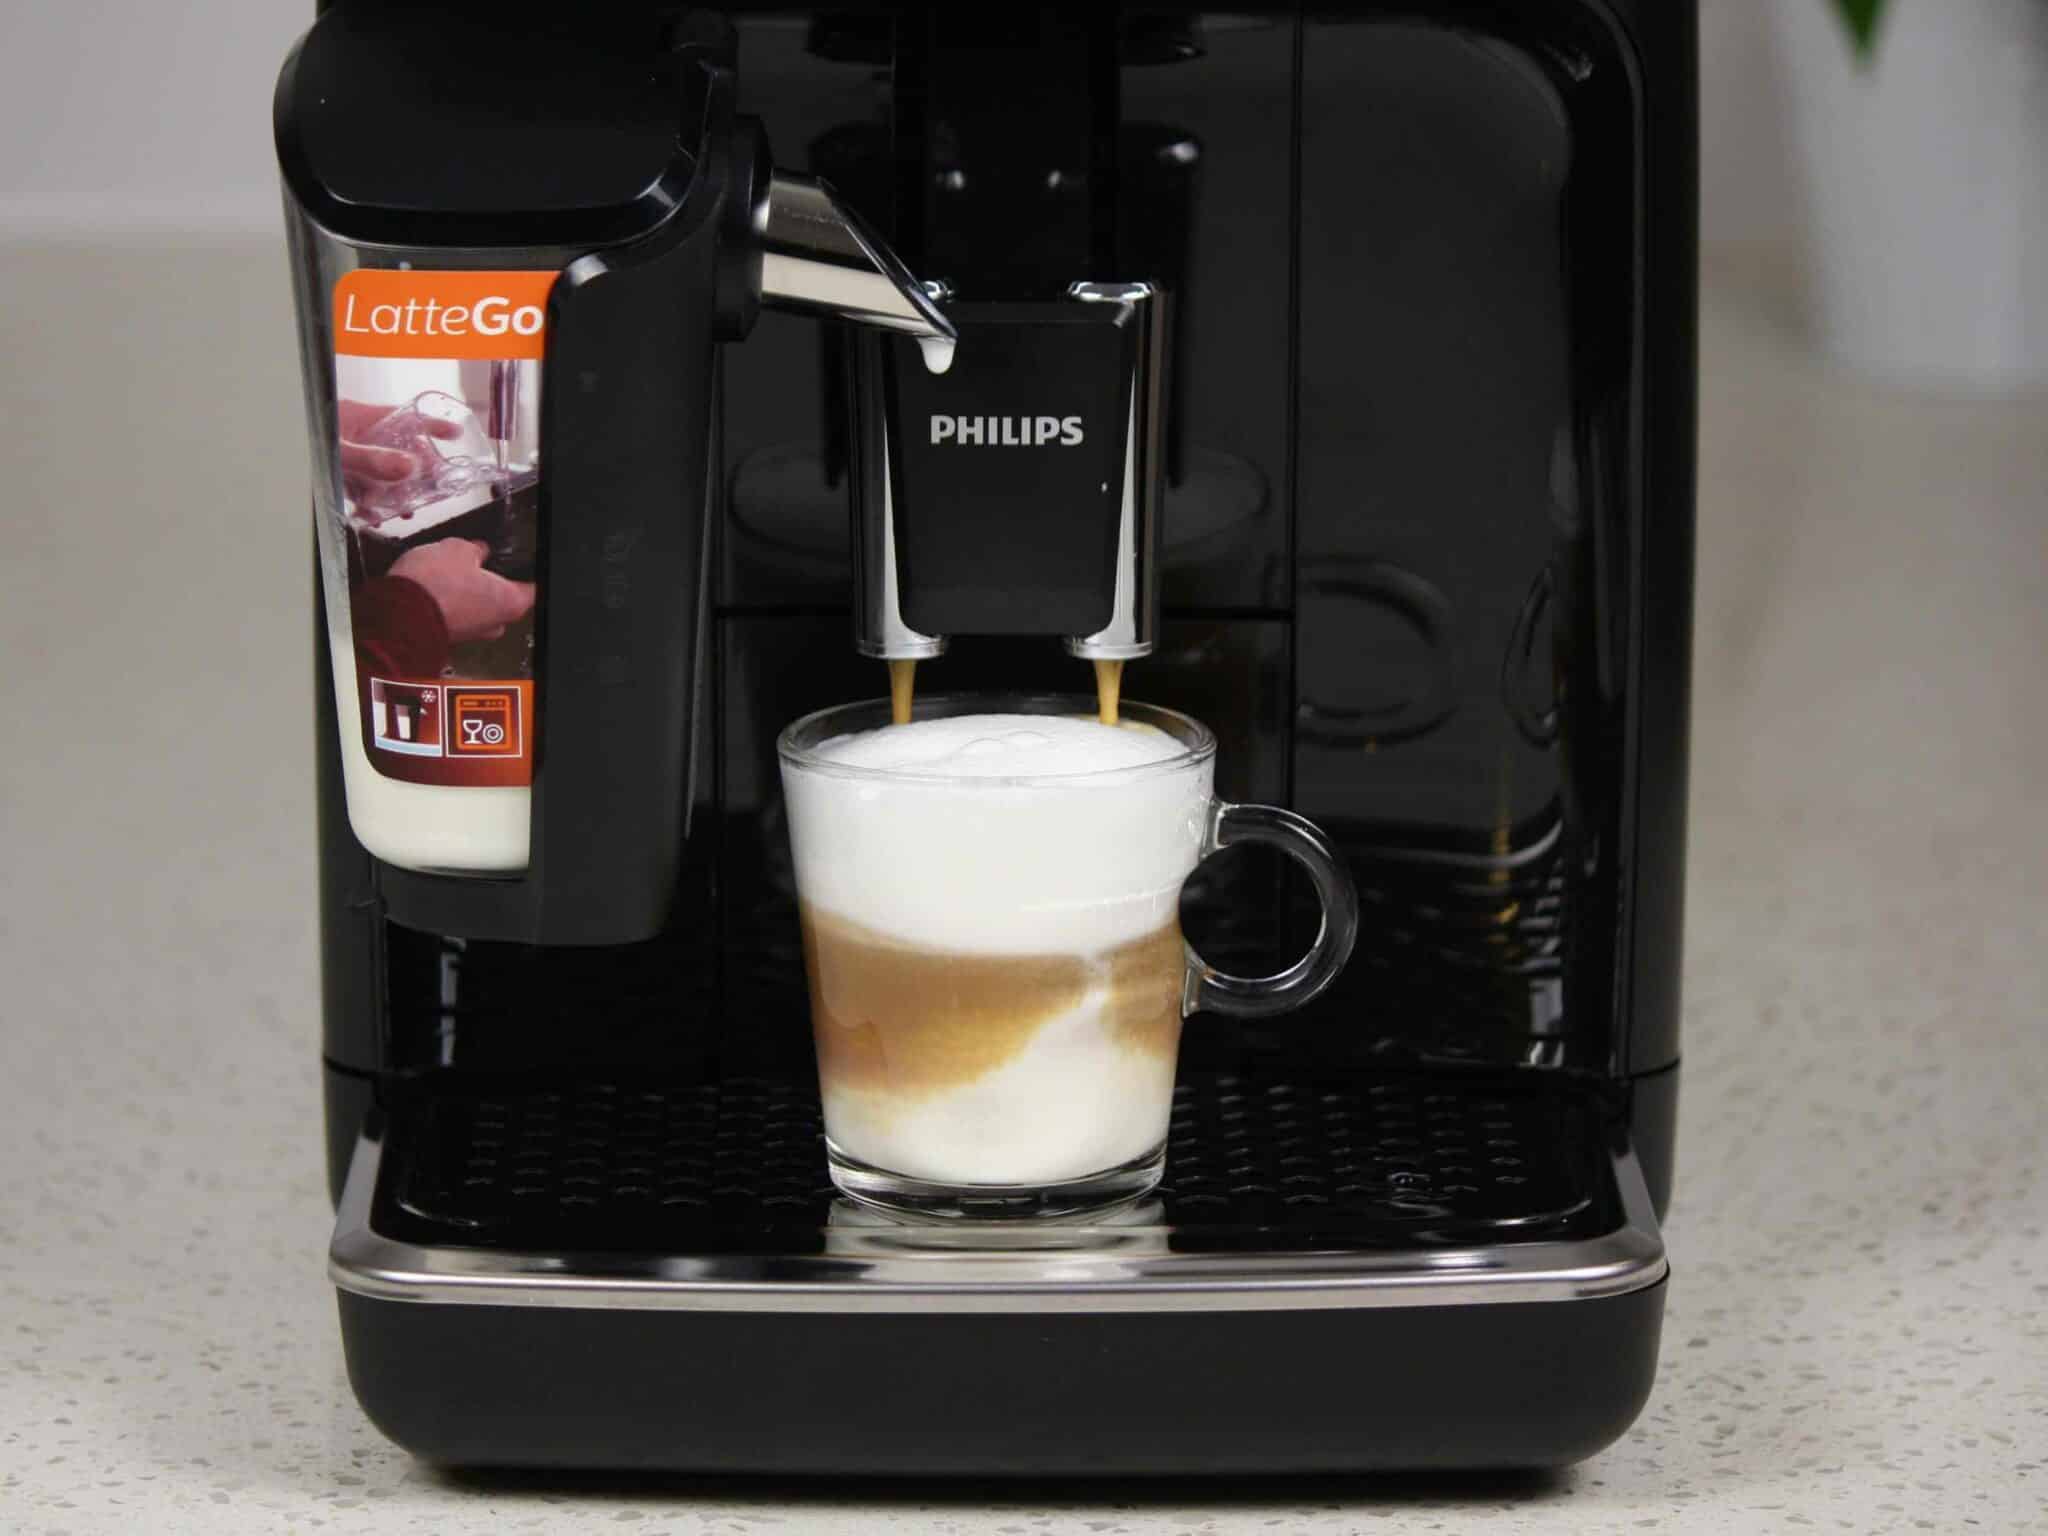 Philips 3200 LatteGo Making a Cappuccino